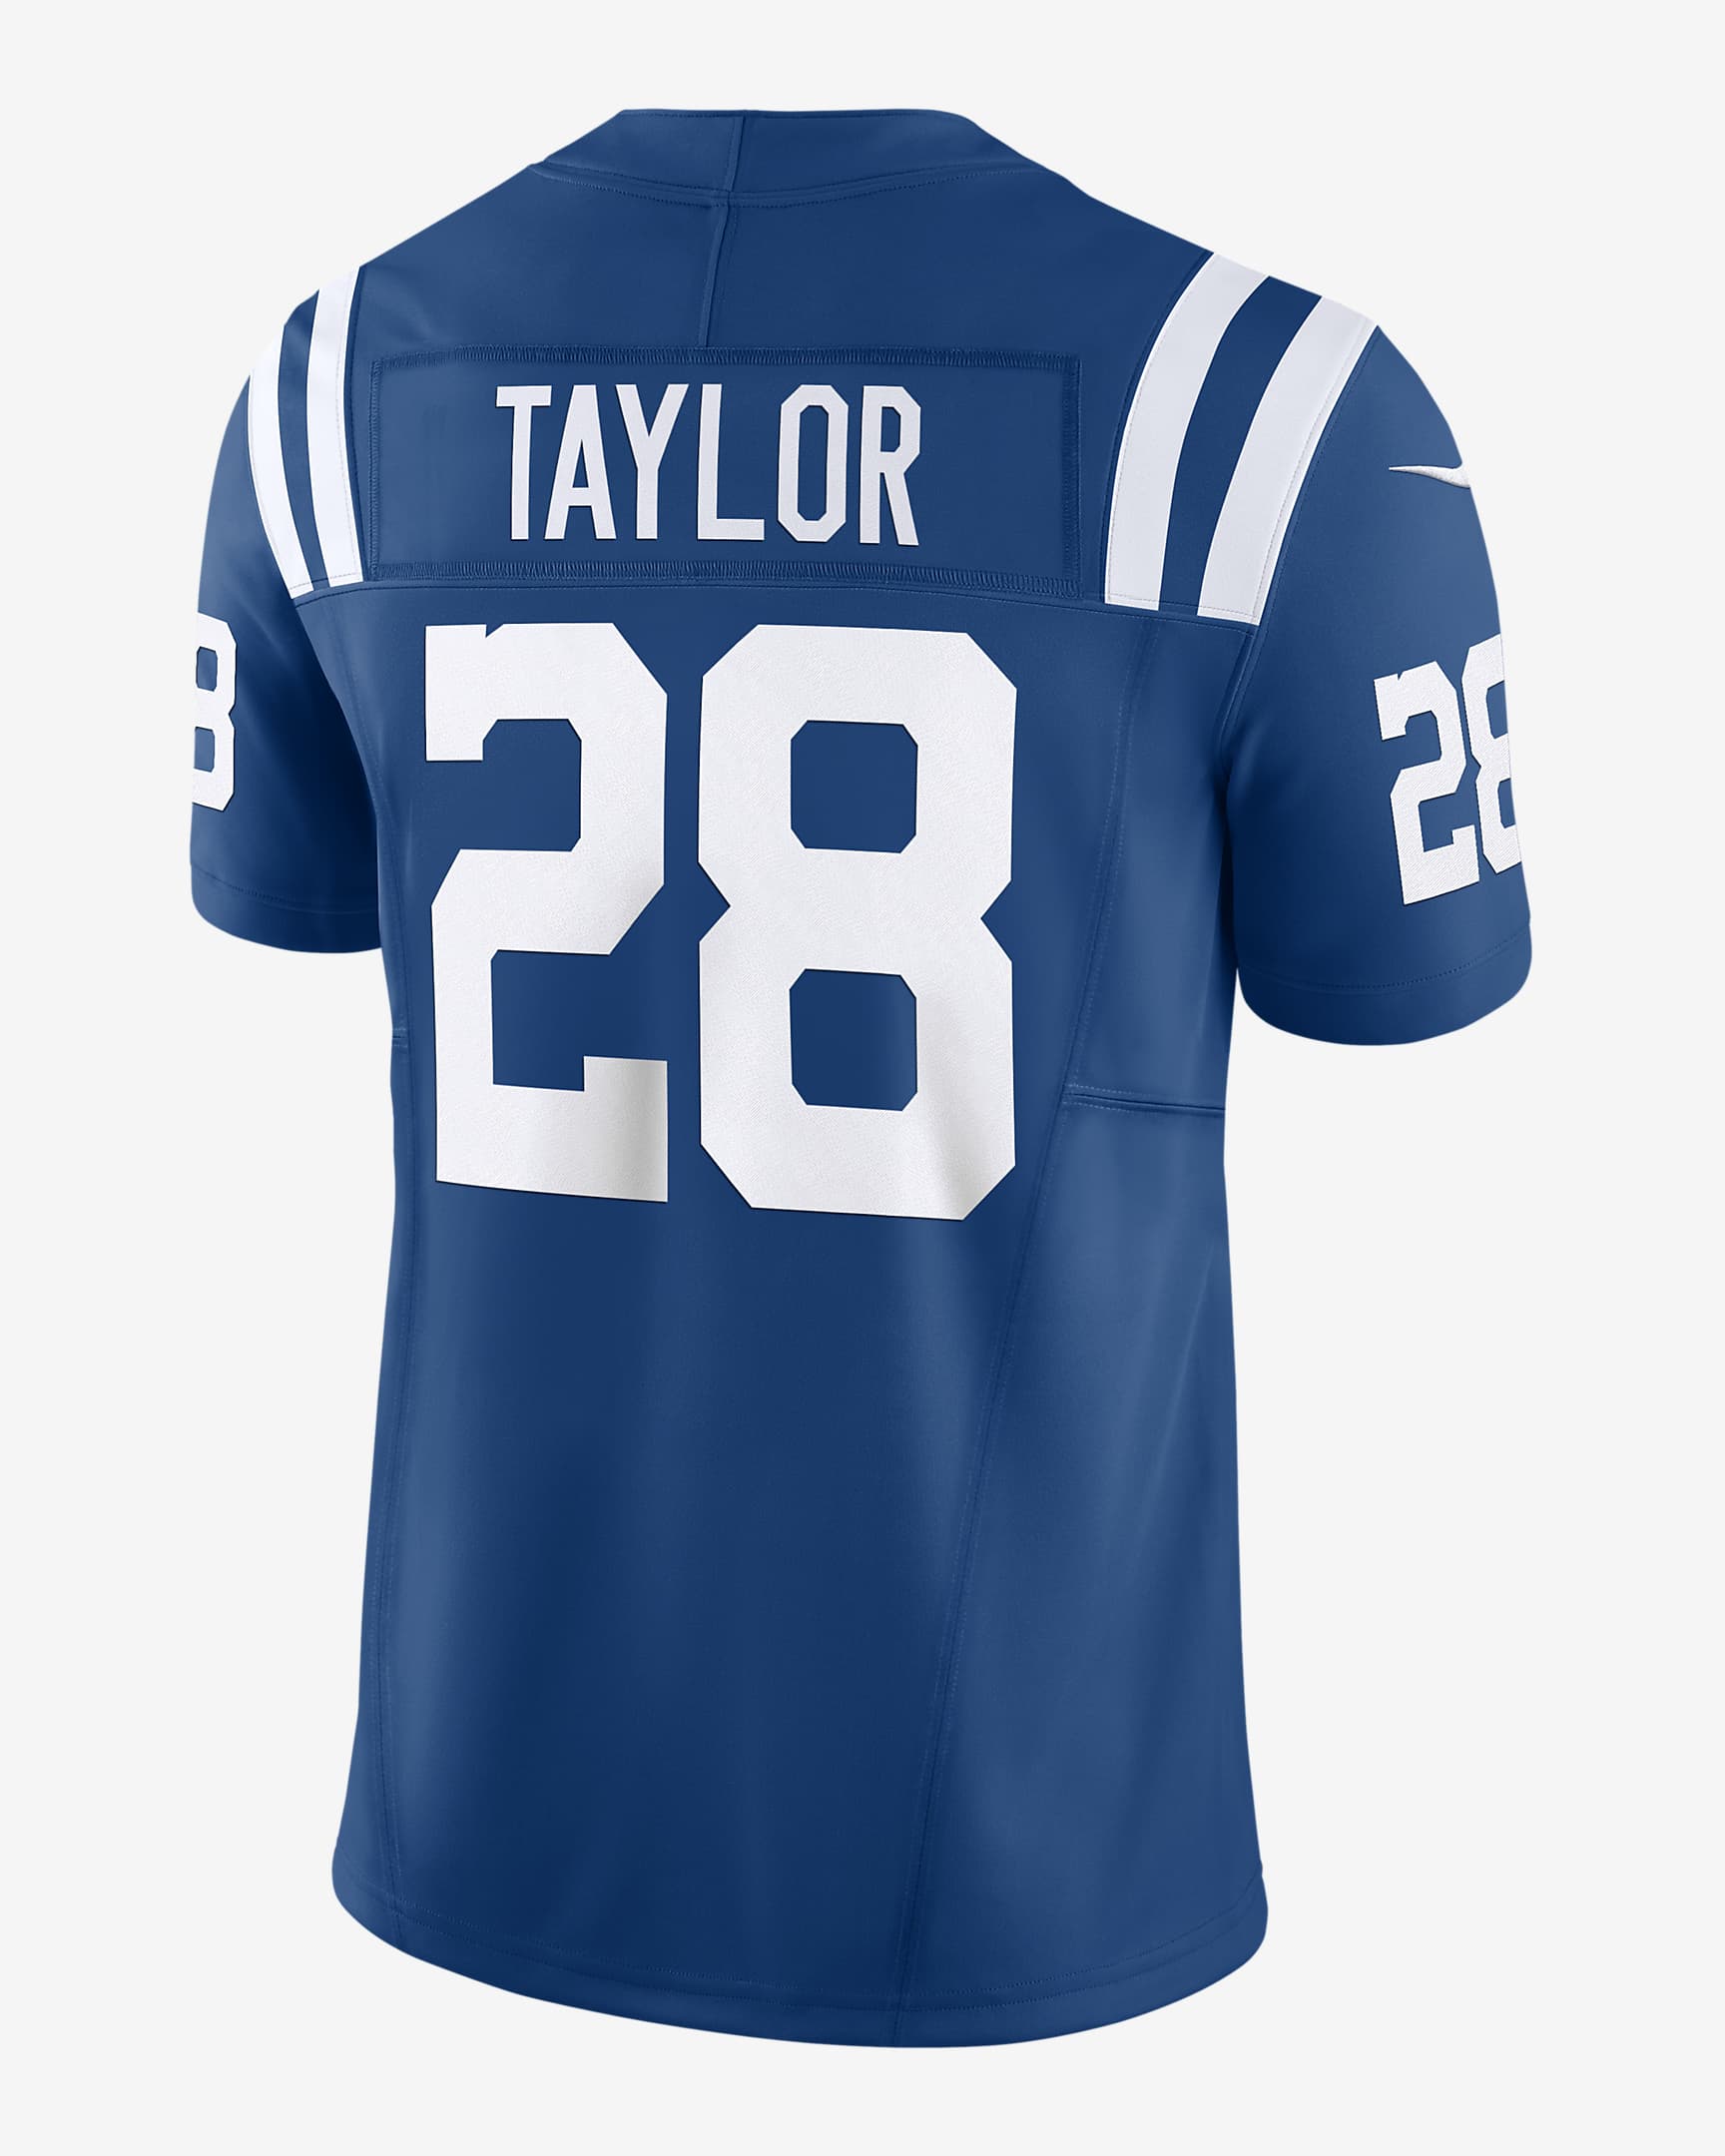 Jonathan Taylor Indianapolis Colts Men's Nike Dri-FIT NFL Limited ...